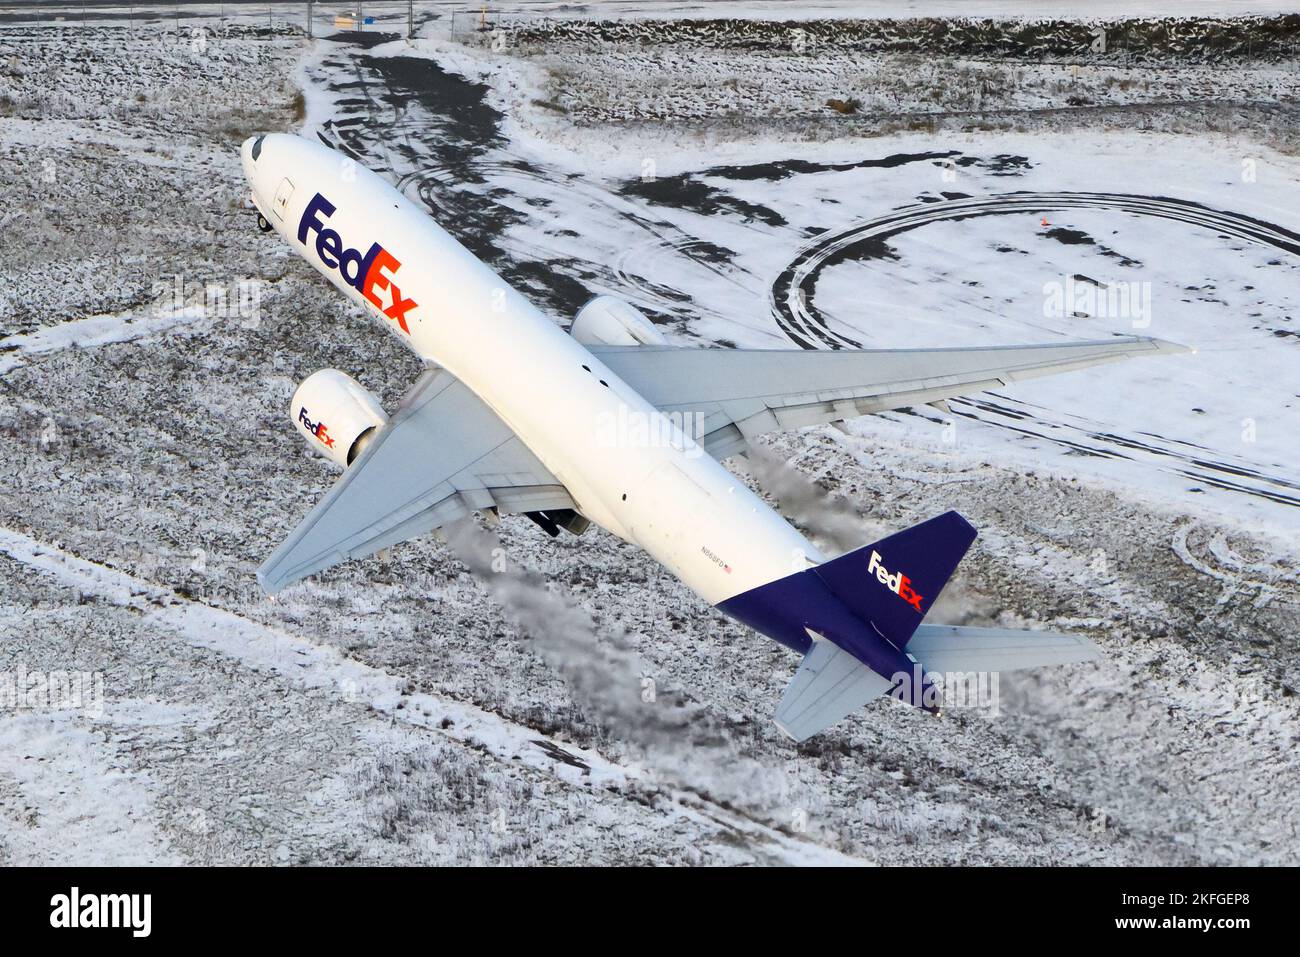 Fedex Boeing 777 aircraft departing in winter. Airplane 777F for cargo transport with Federal Express taking off. Plane departing seen from above. Stock Photo